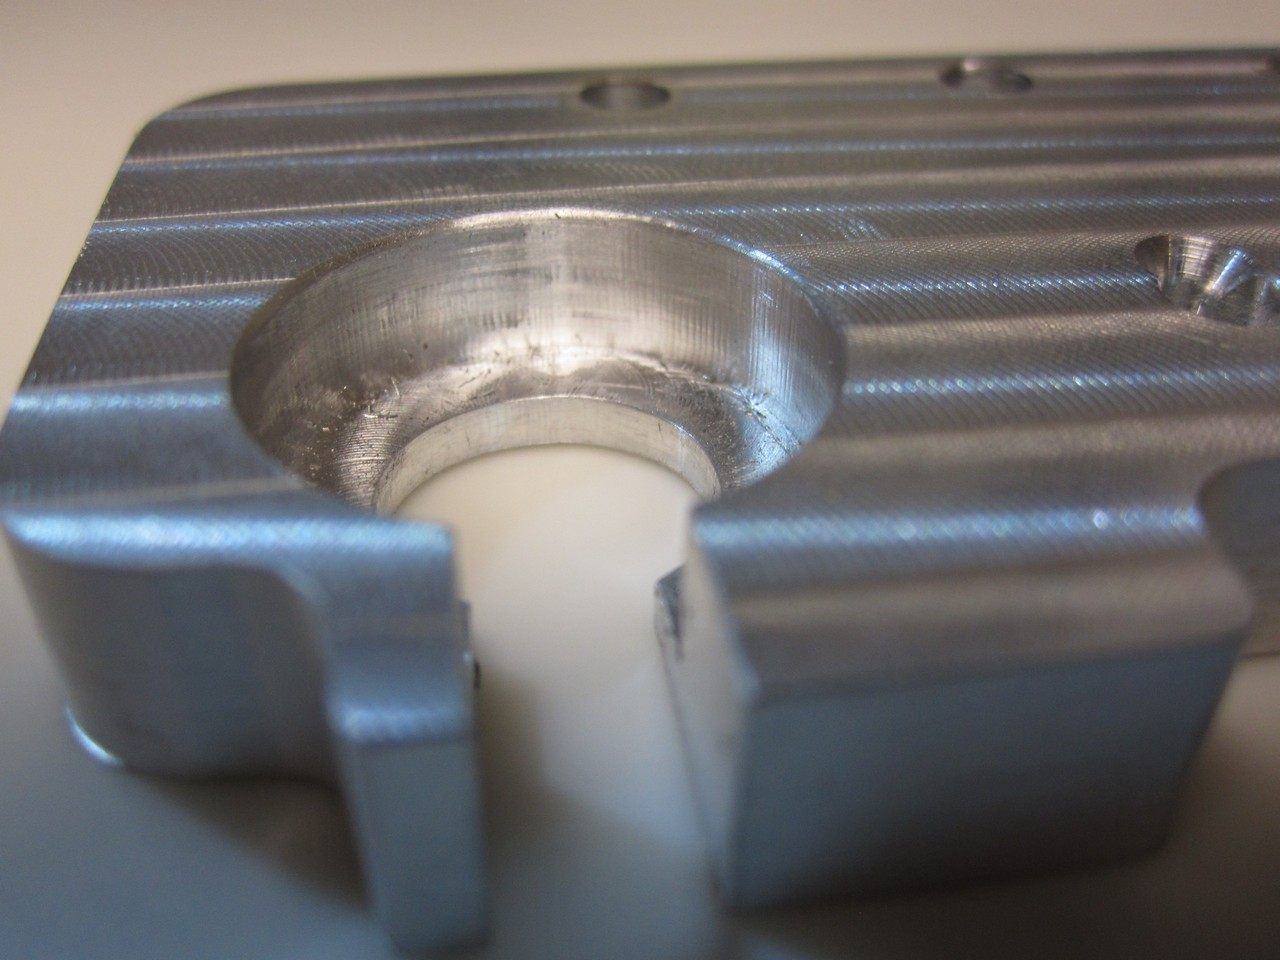 The bore holds the snout of a Proxxon tool.